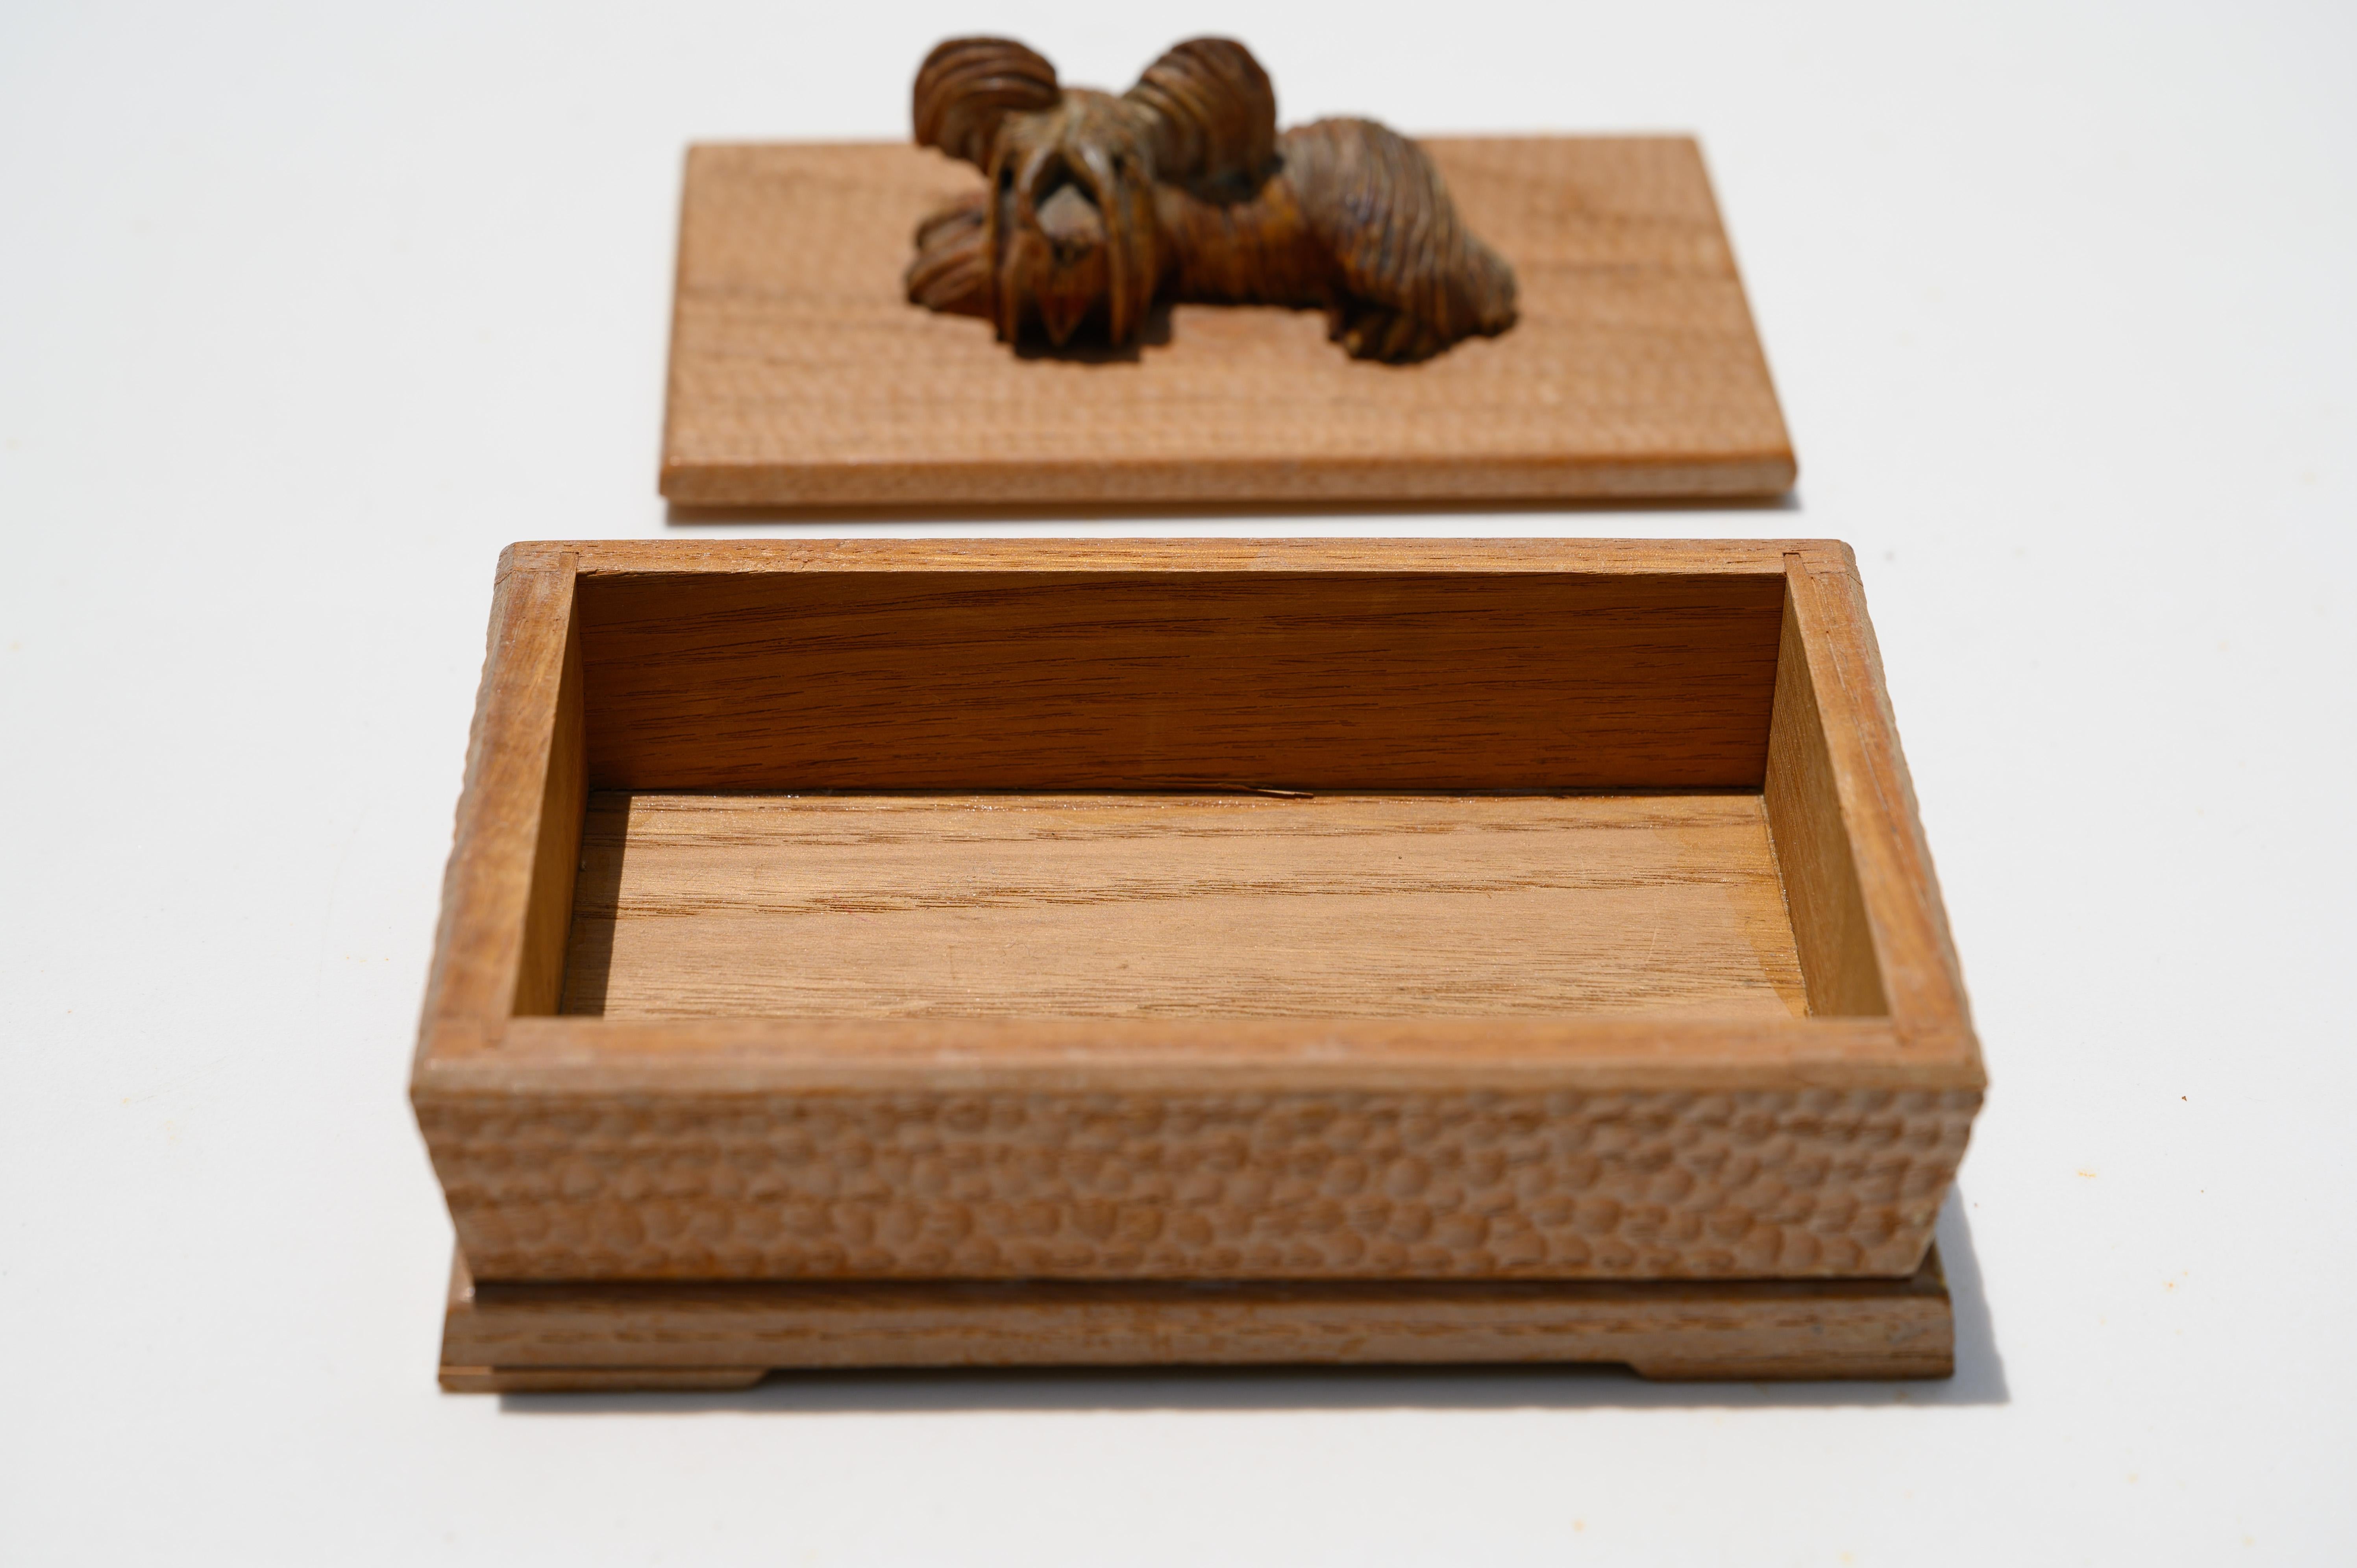 20th Century Hand-Carved Decorative Wooden Keepsake Box with Animal Sculpture Lidded Top For Sale